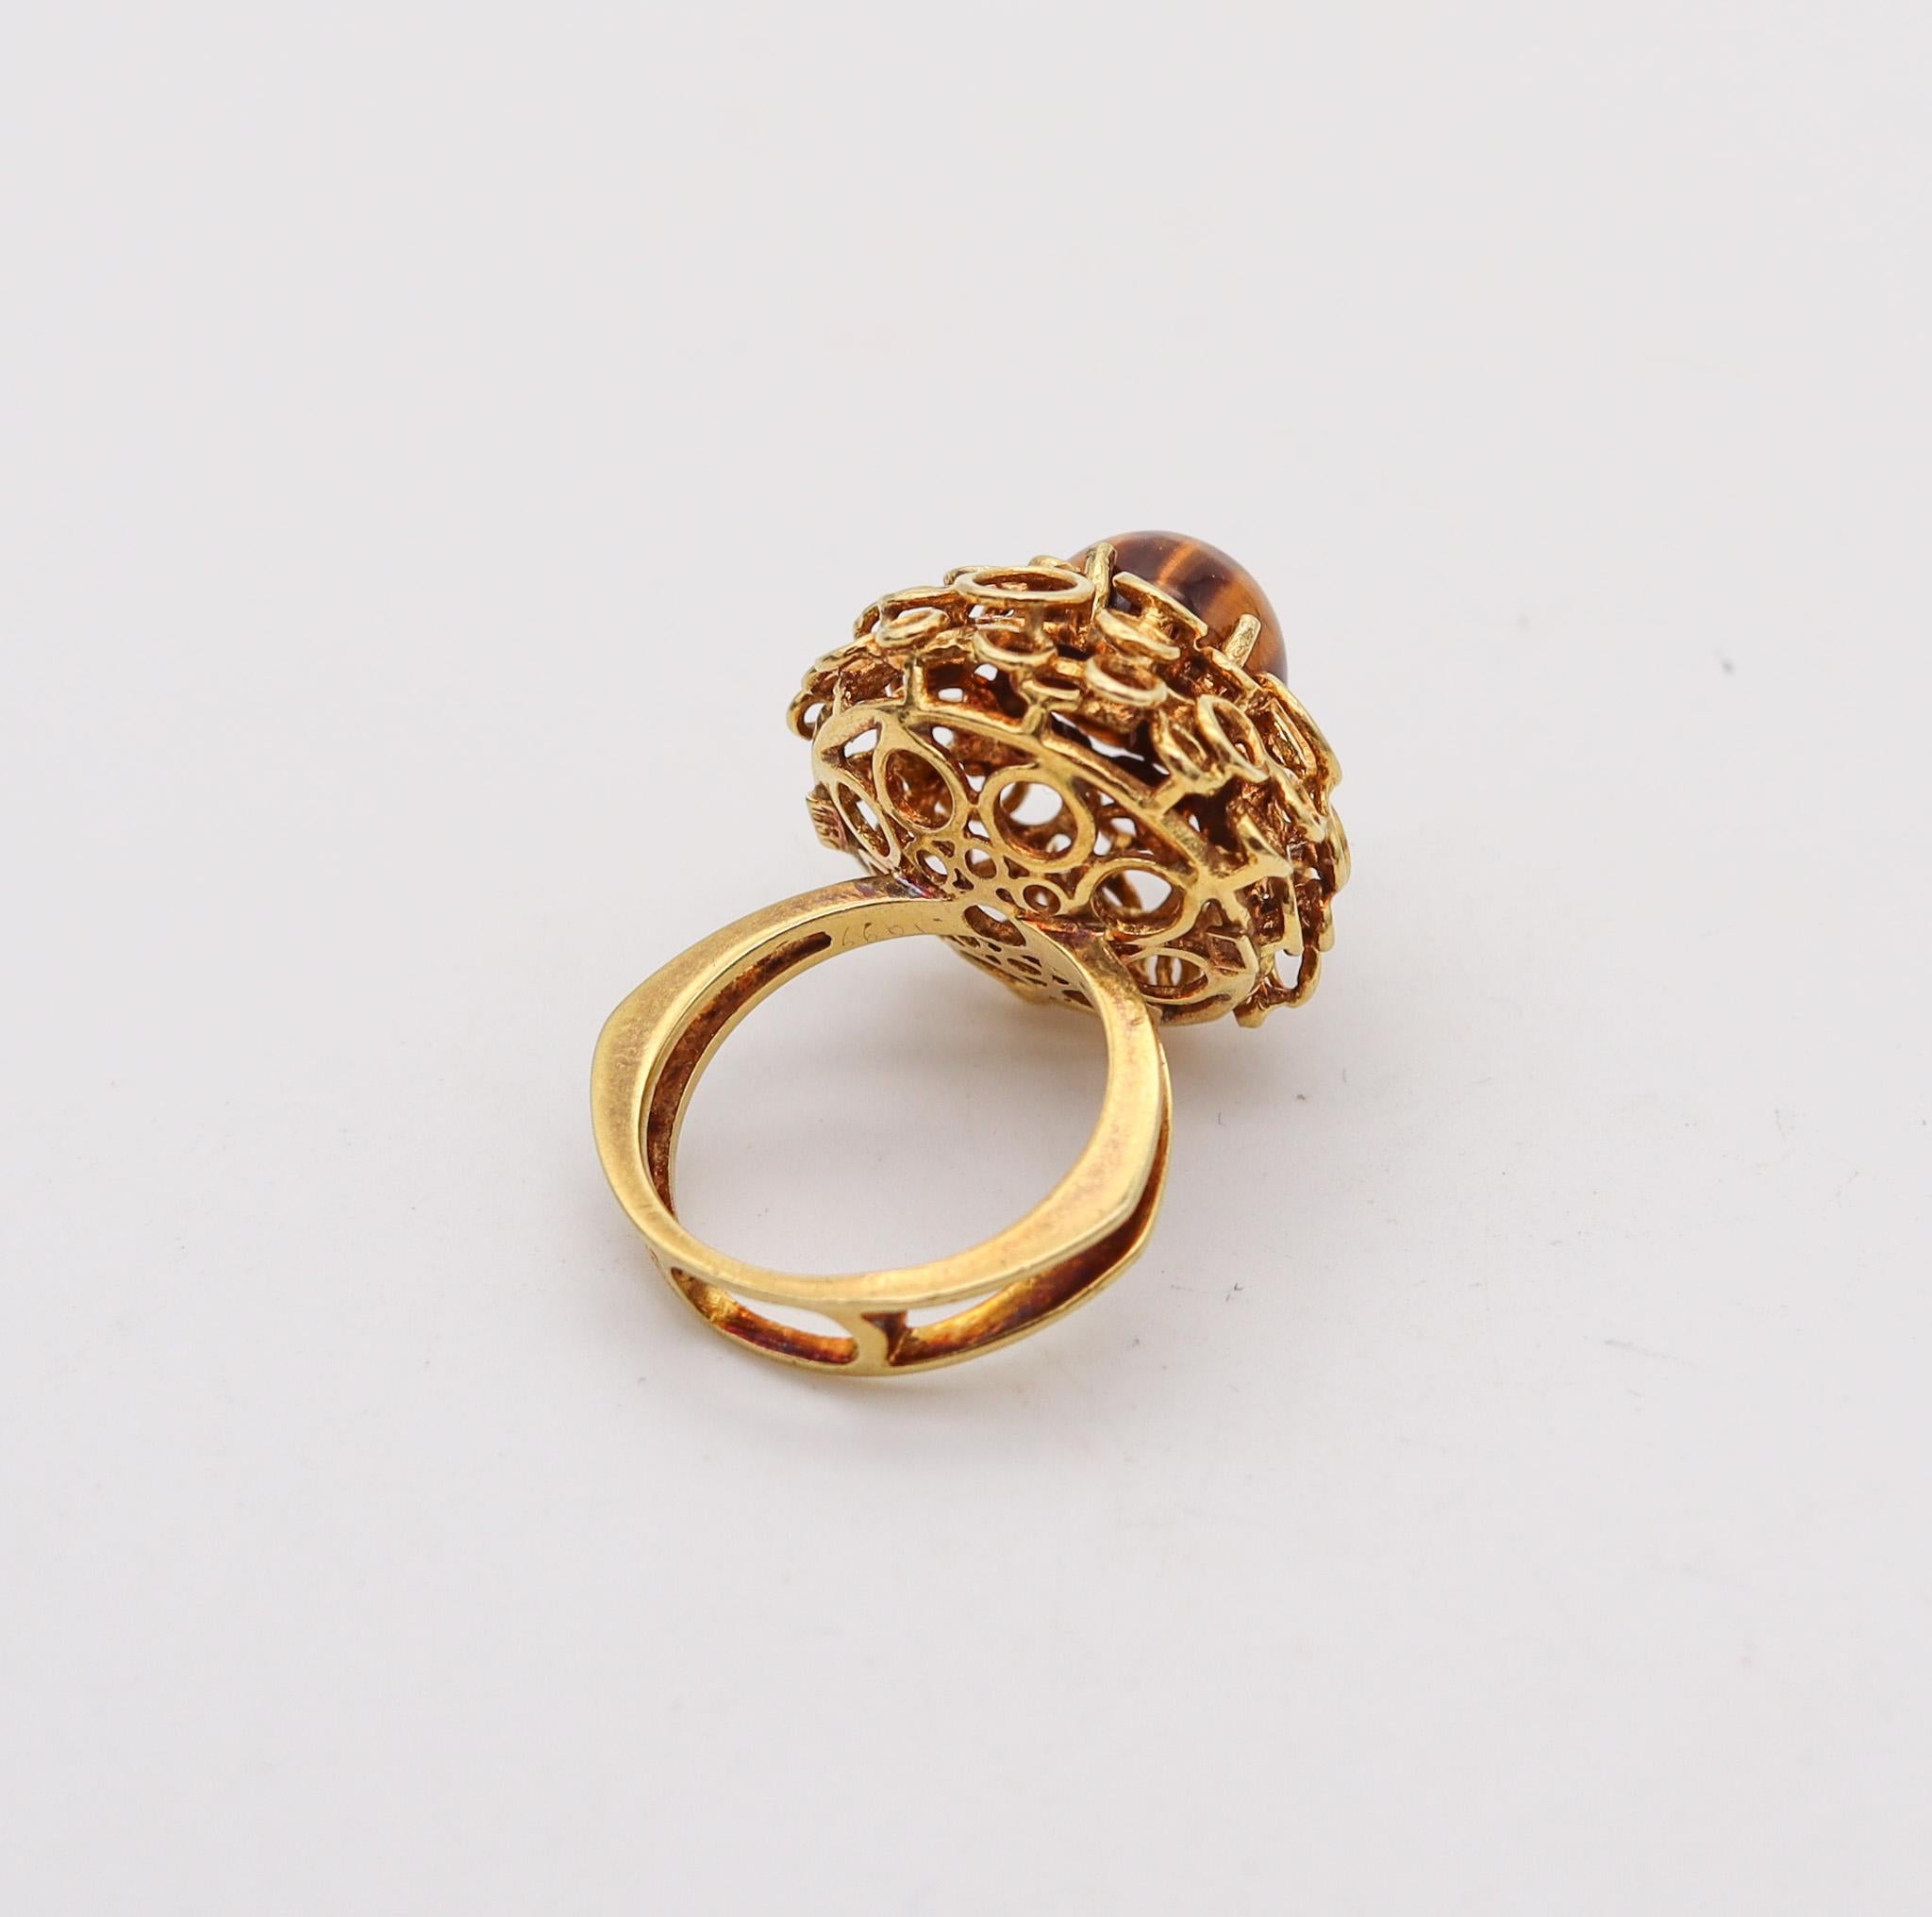 Women's Modernist 1970 Sculptural Cocktail Ring In Solid 18Kt Gold With Tiger Eye Cab